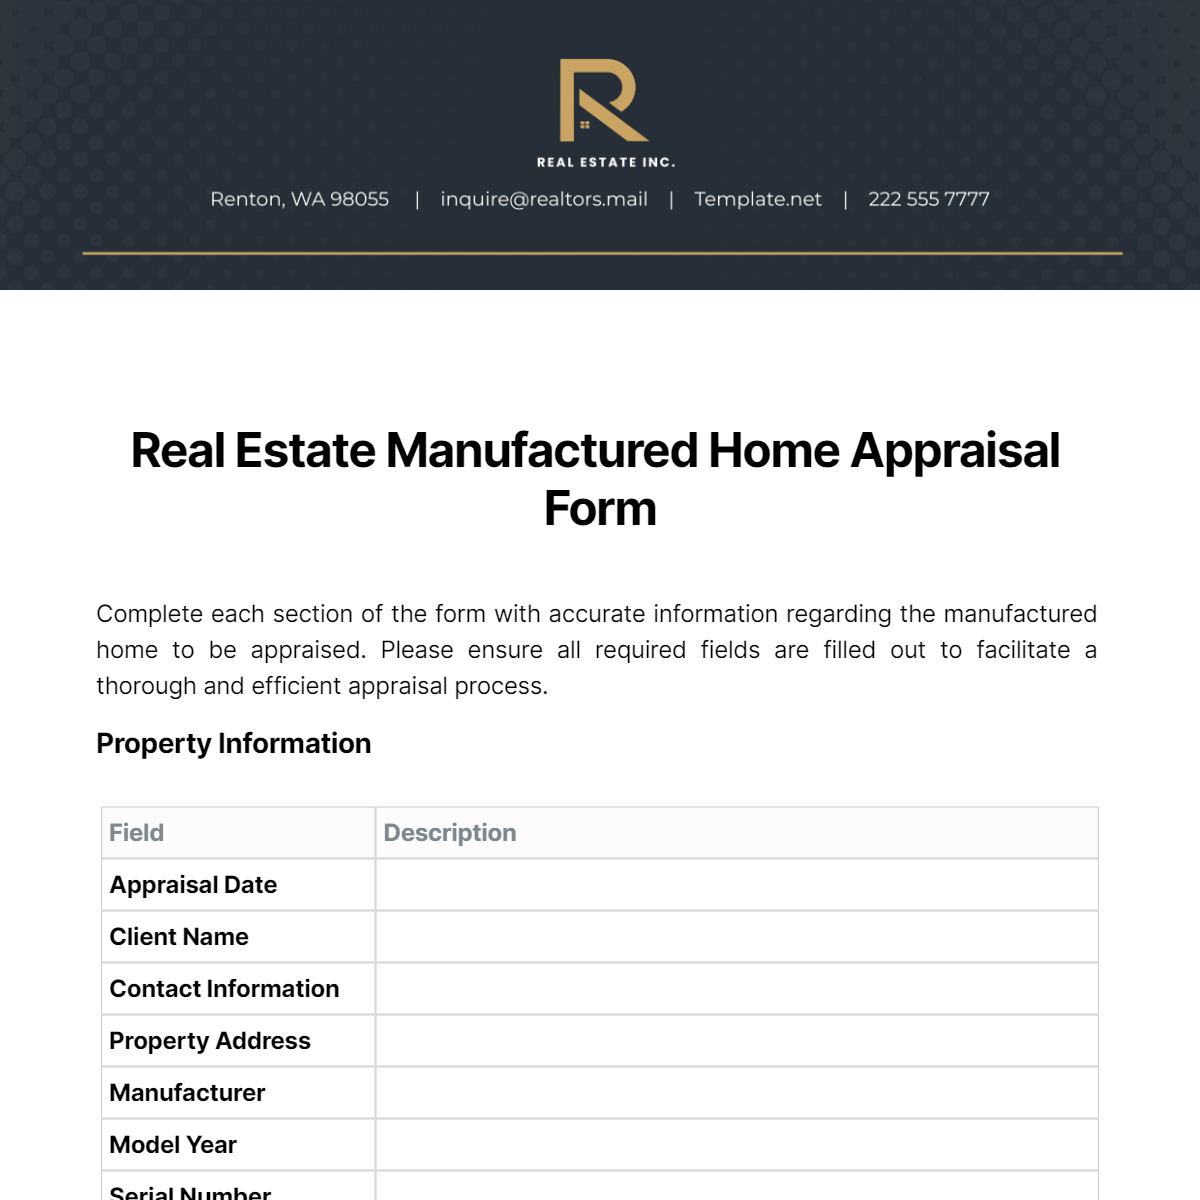 Real Estate Manufactured Home Appraisal Form Template